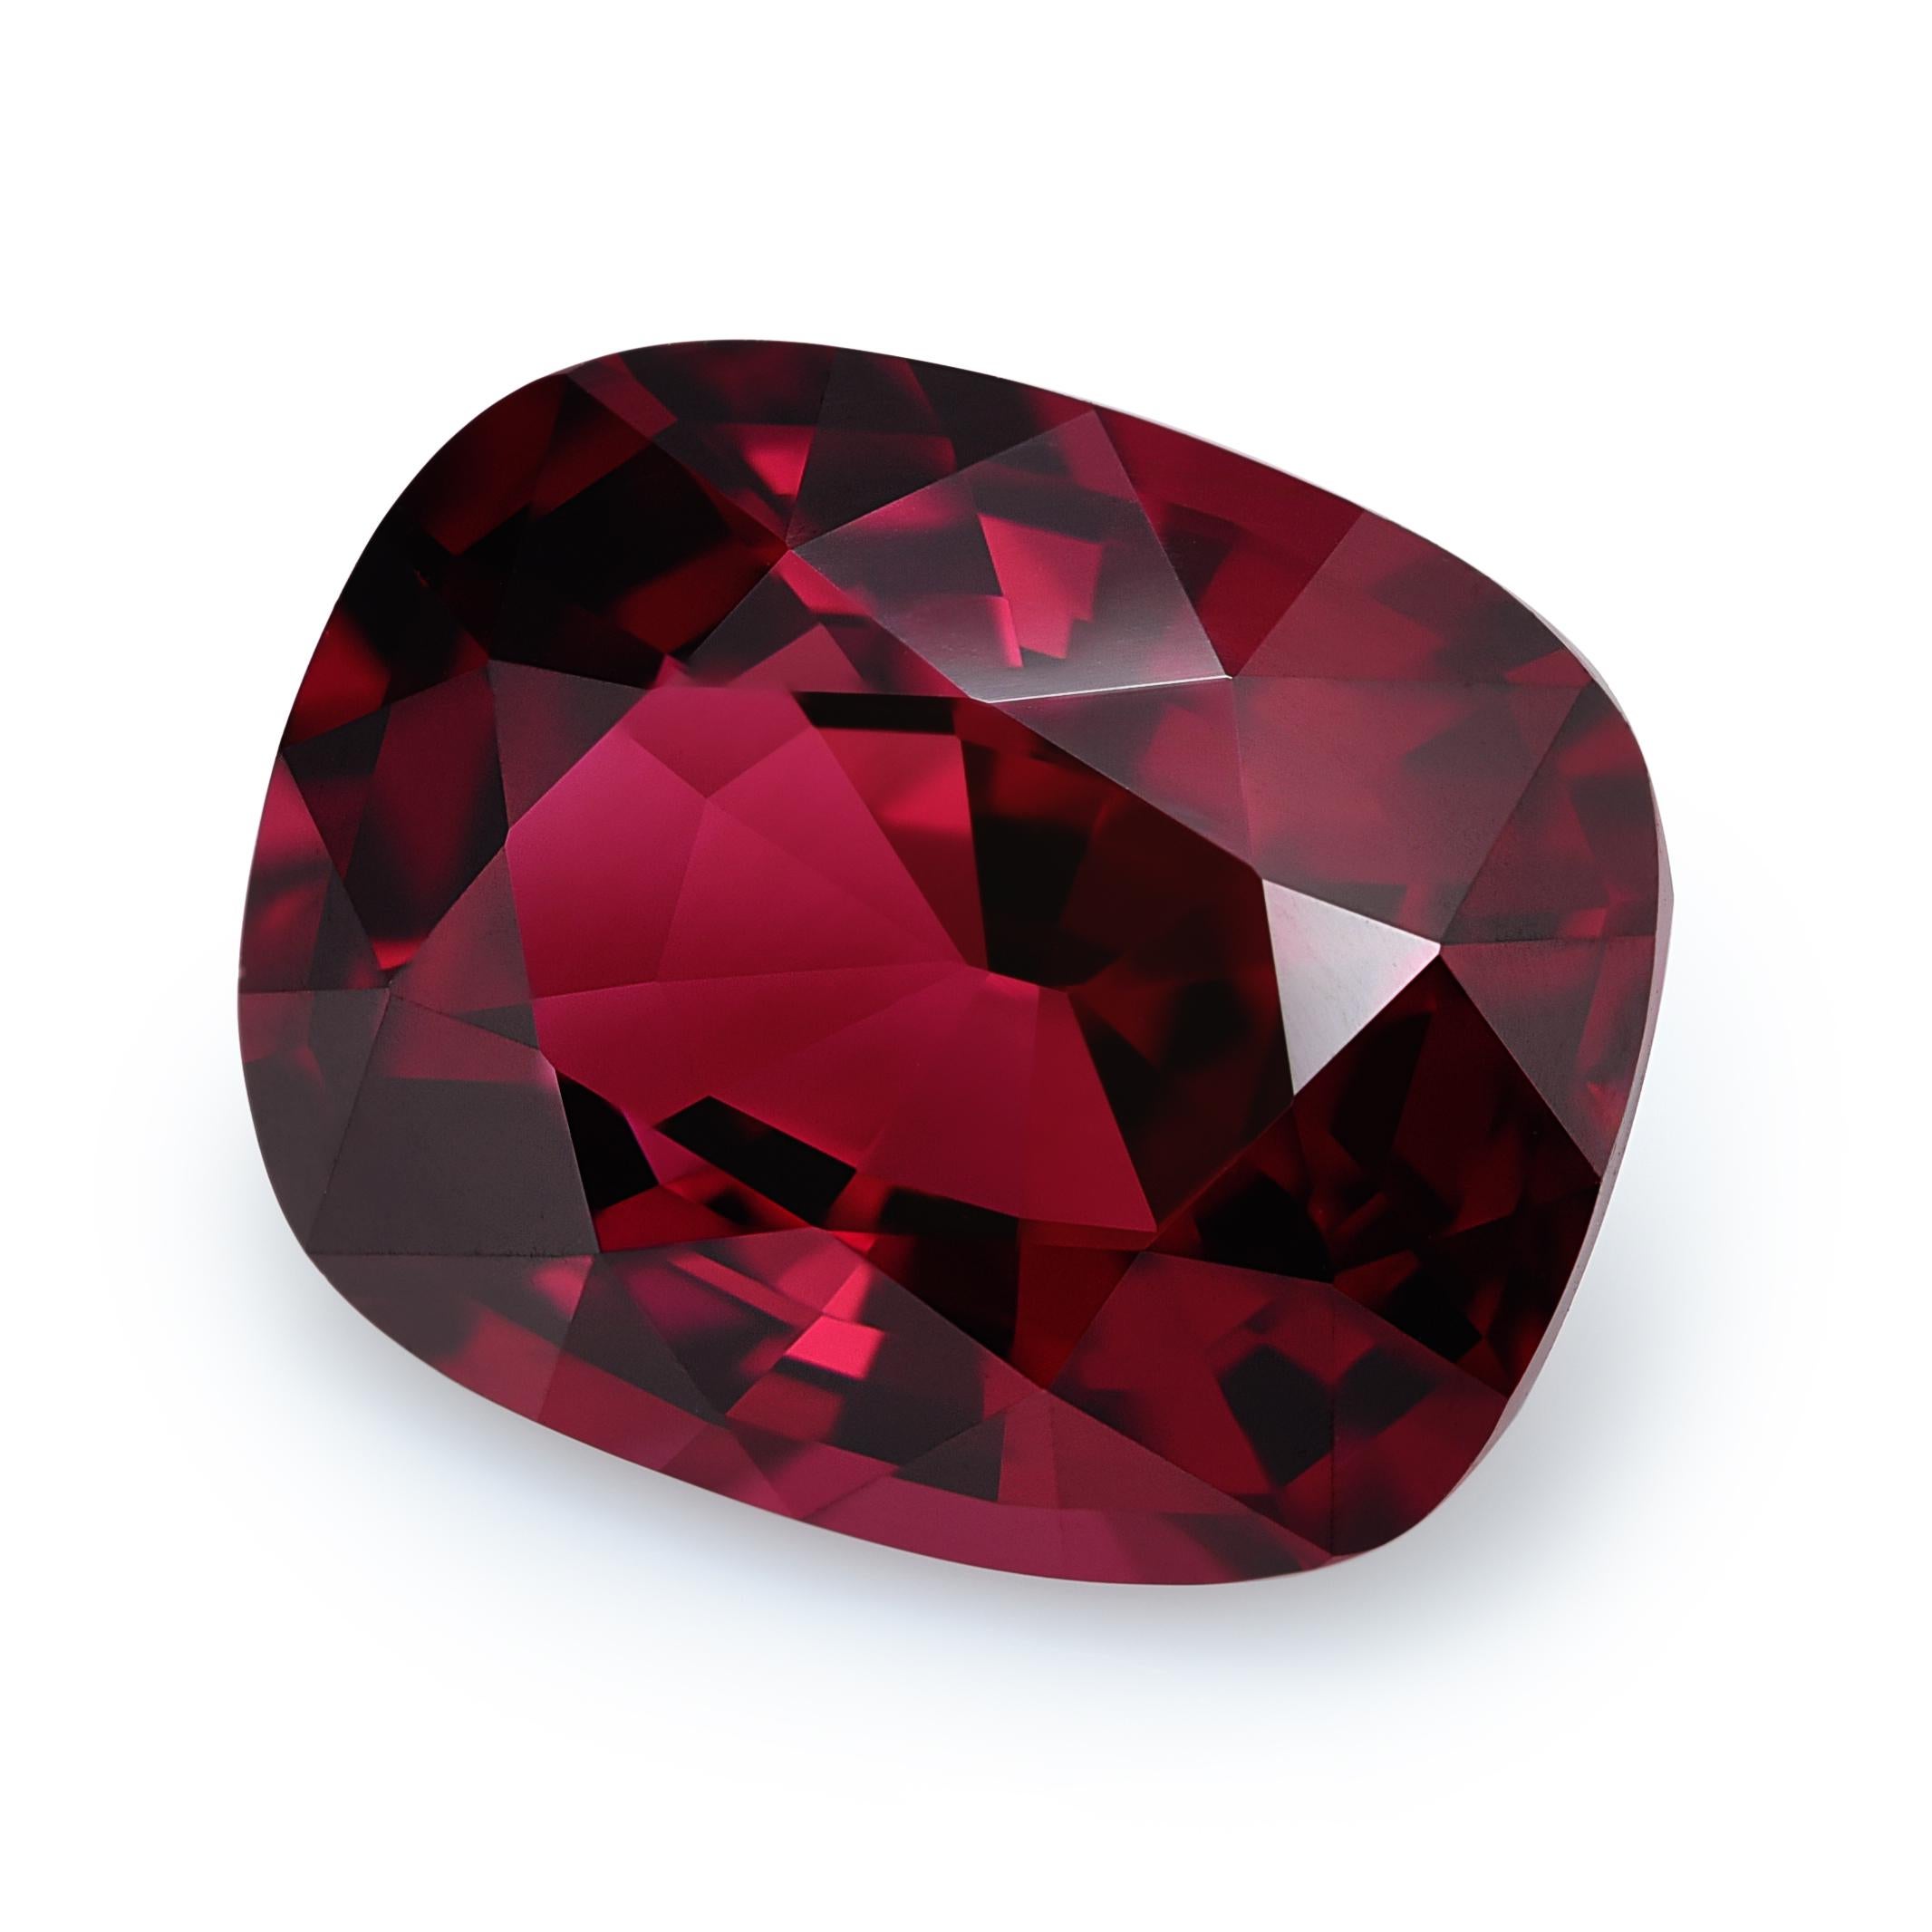 Discover the allure of a natural garnet, 10.24 carats in weight. With a cushion shape measuring 14.1 x 11.5 x 7.5 mm, it captivates with a Brilliant/Step cut, enhancing both brilliance and depth. The rich red color and very eye-clean clarity make it